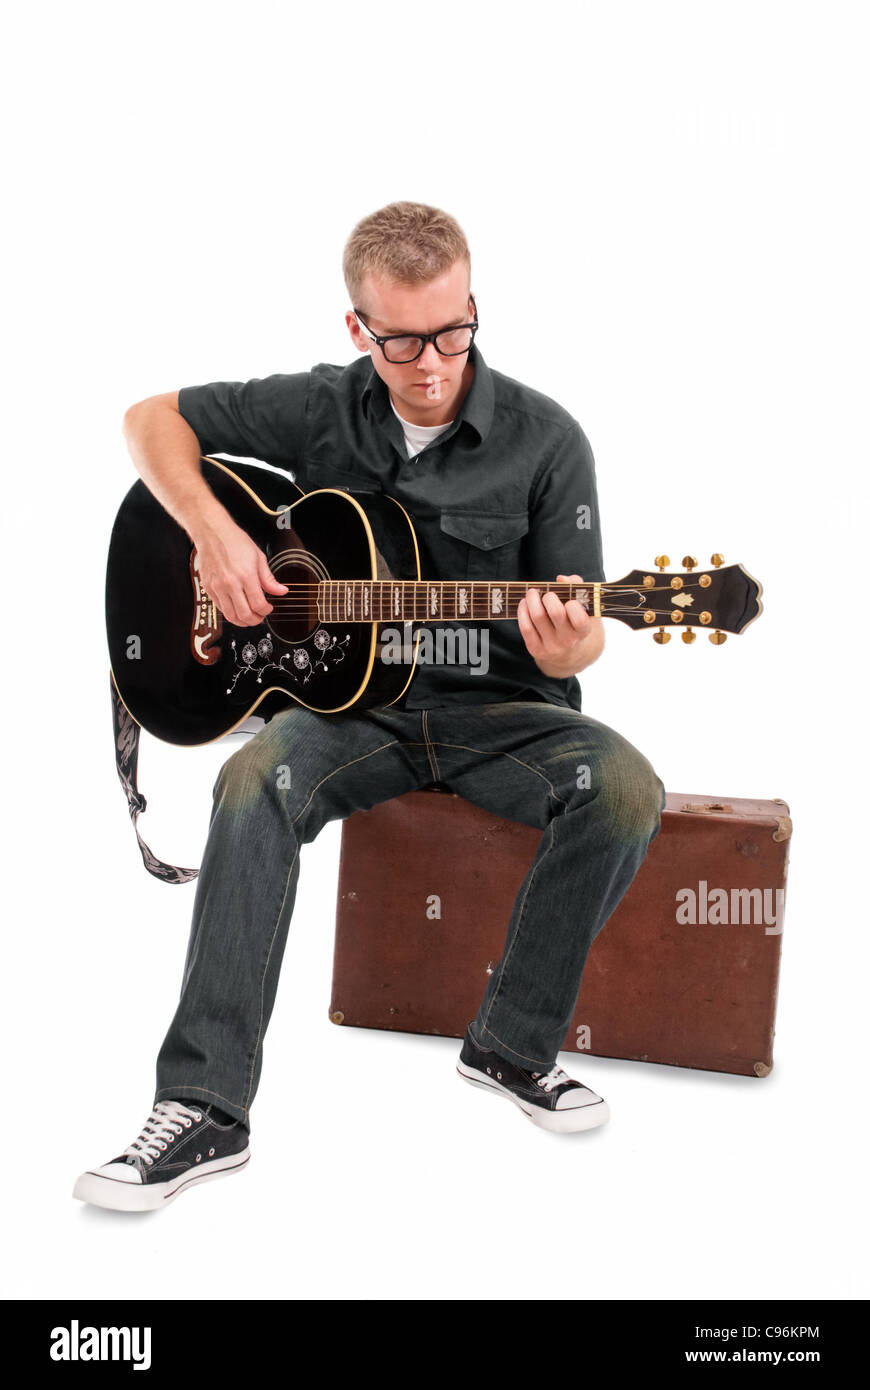 Musician playing solo on guitar. All kinds of musical instruments in different situations. Stock Photo